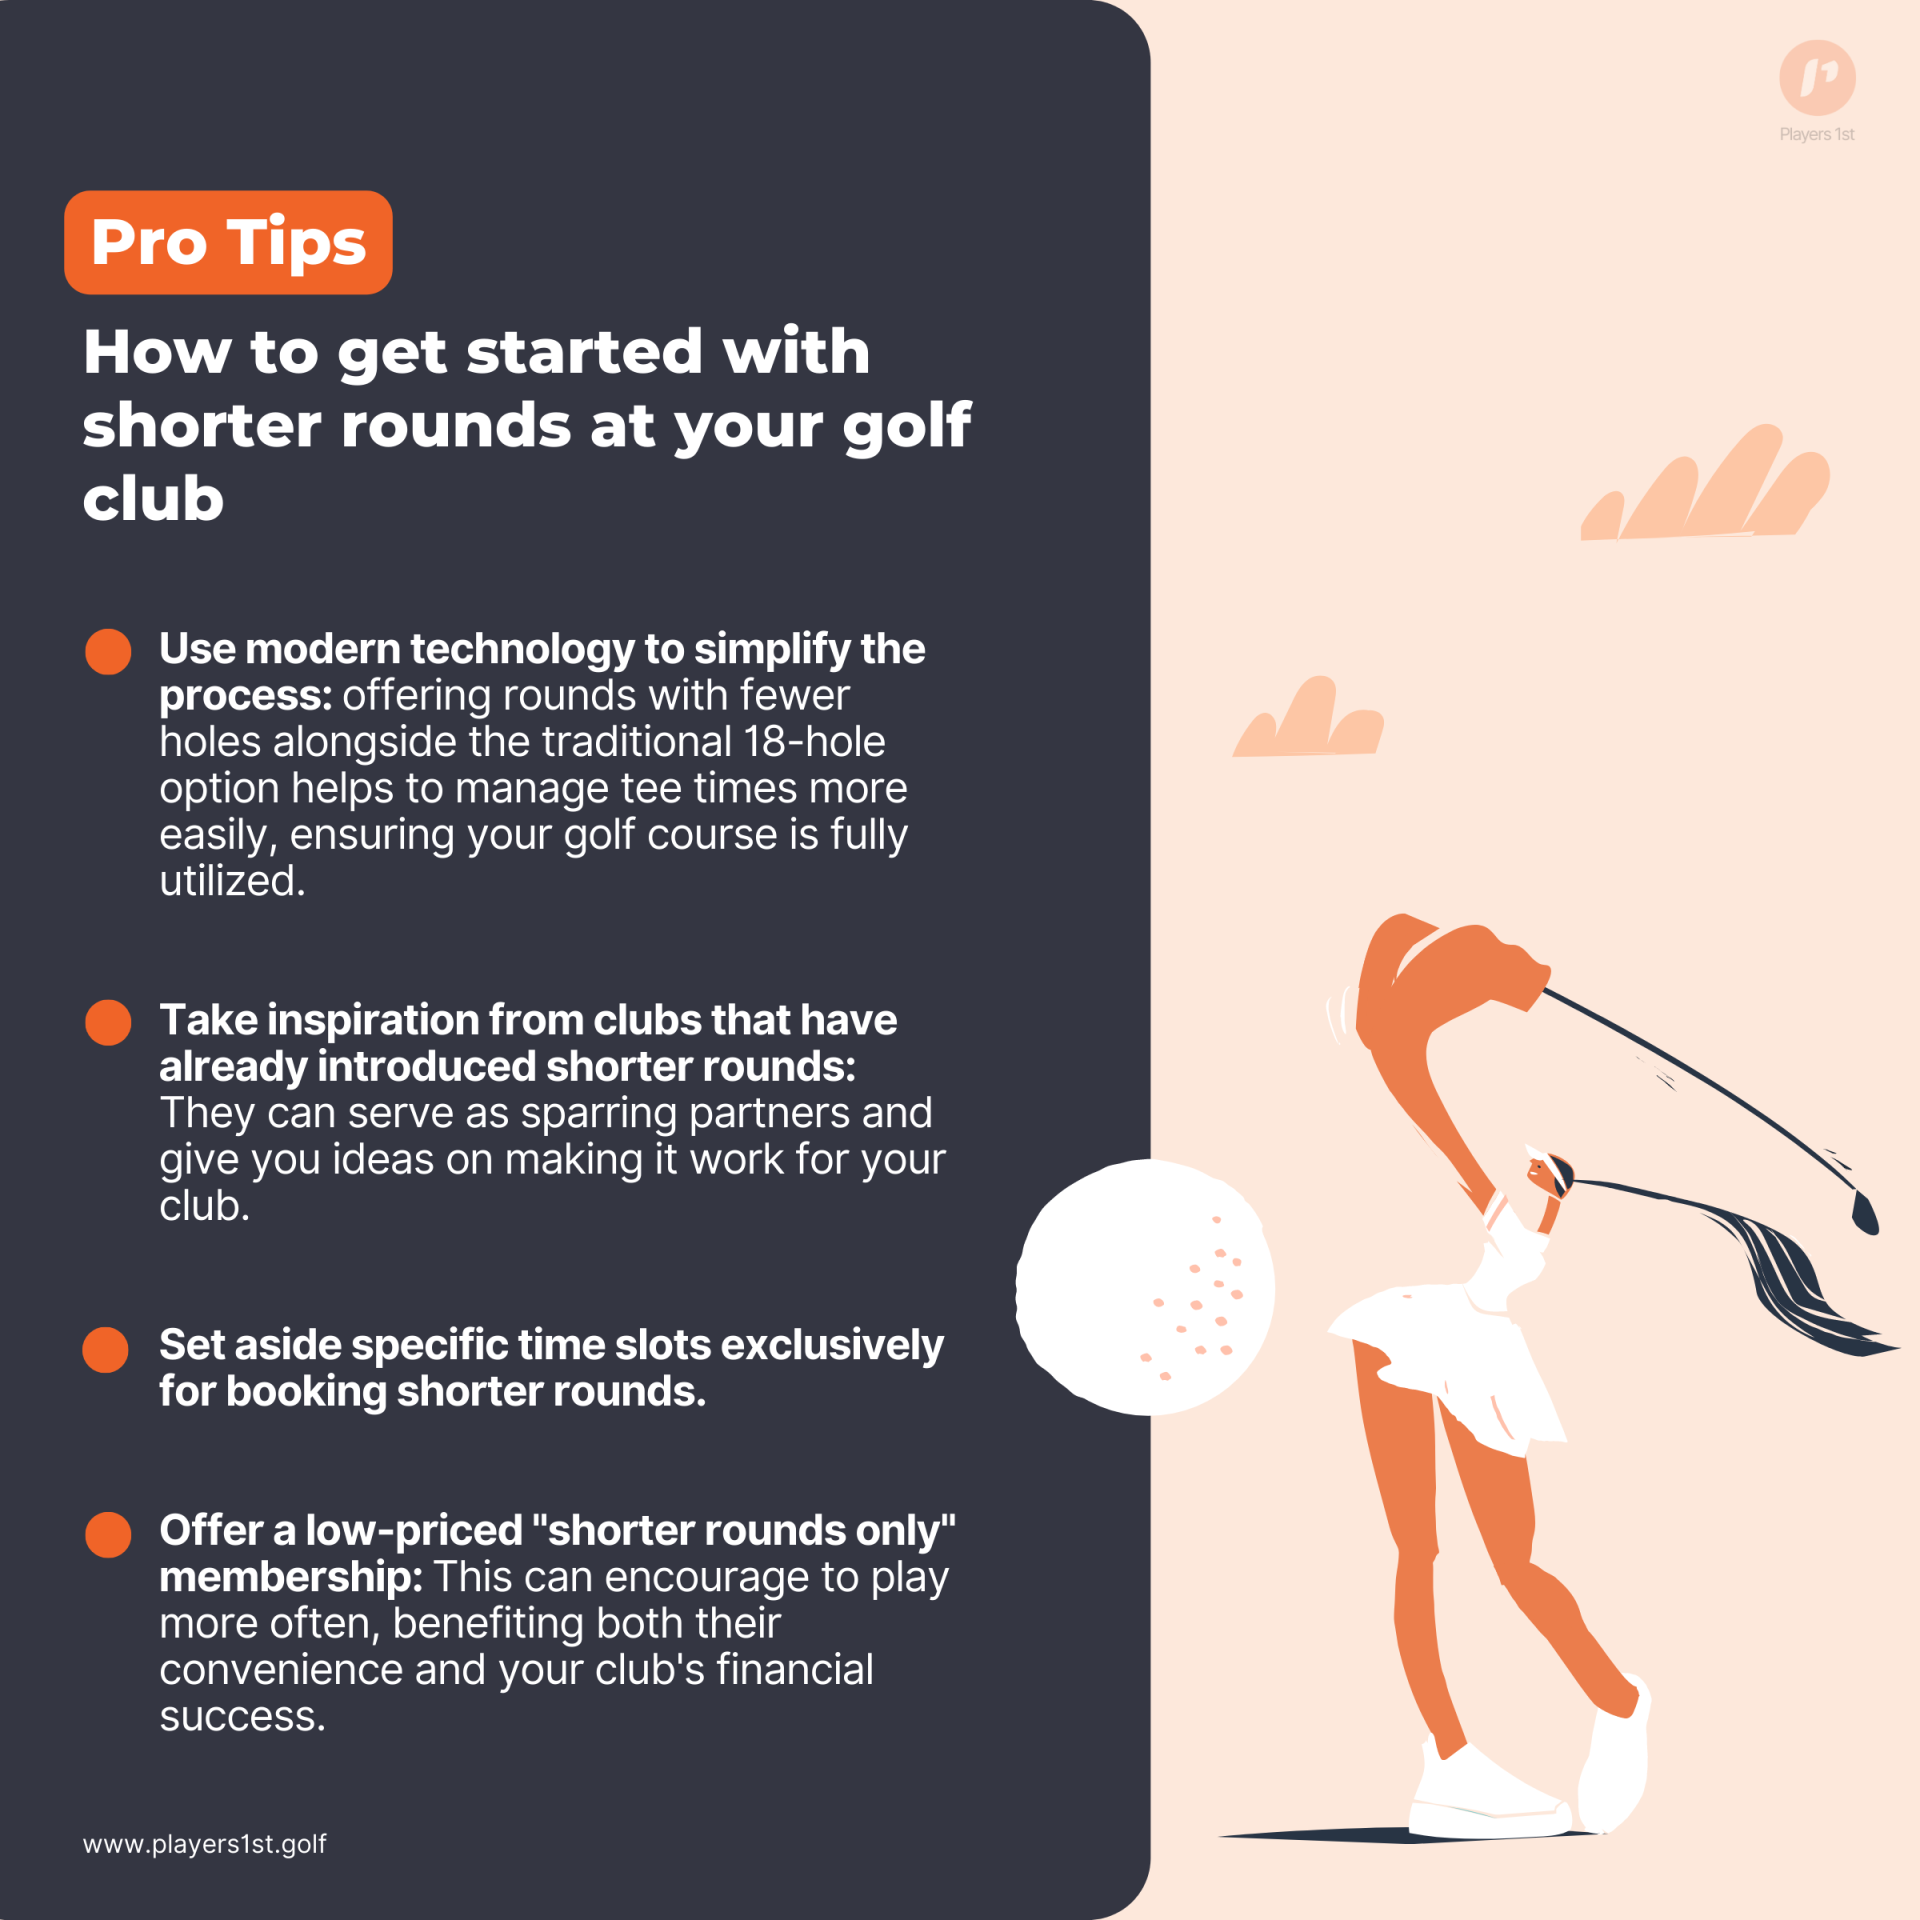 How to get started with shorter rounds at your golf club.